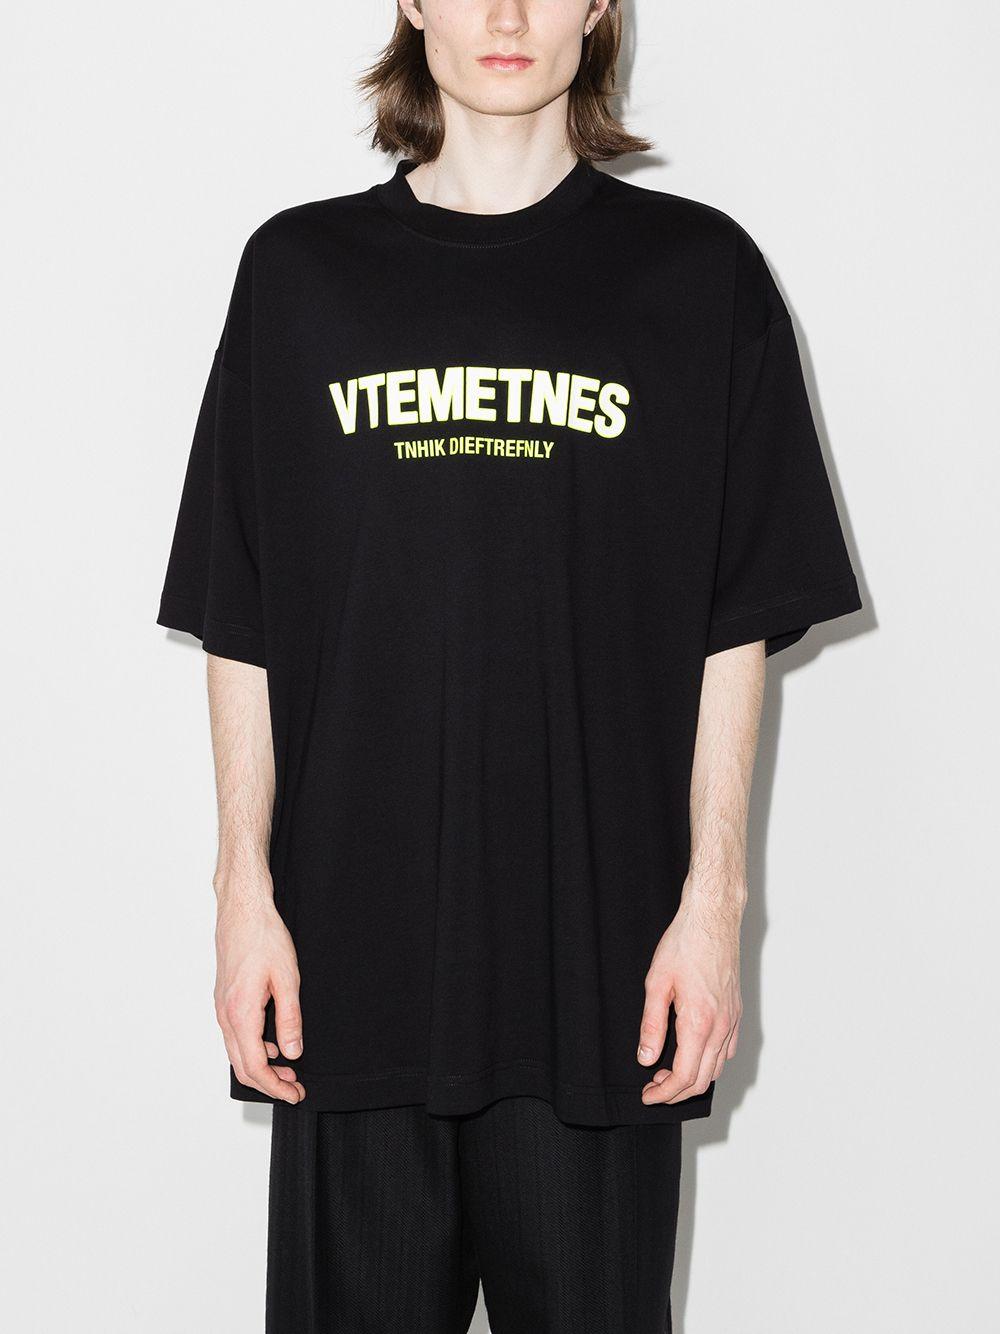 Vetements Cotton Think Differently Vtemetnes T-shirt in Black for Men -  Save 14% | Lyst